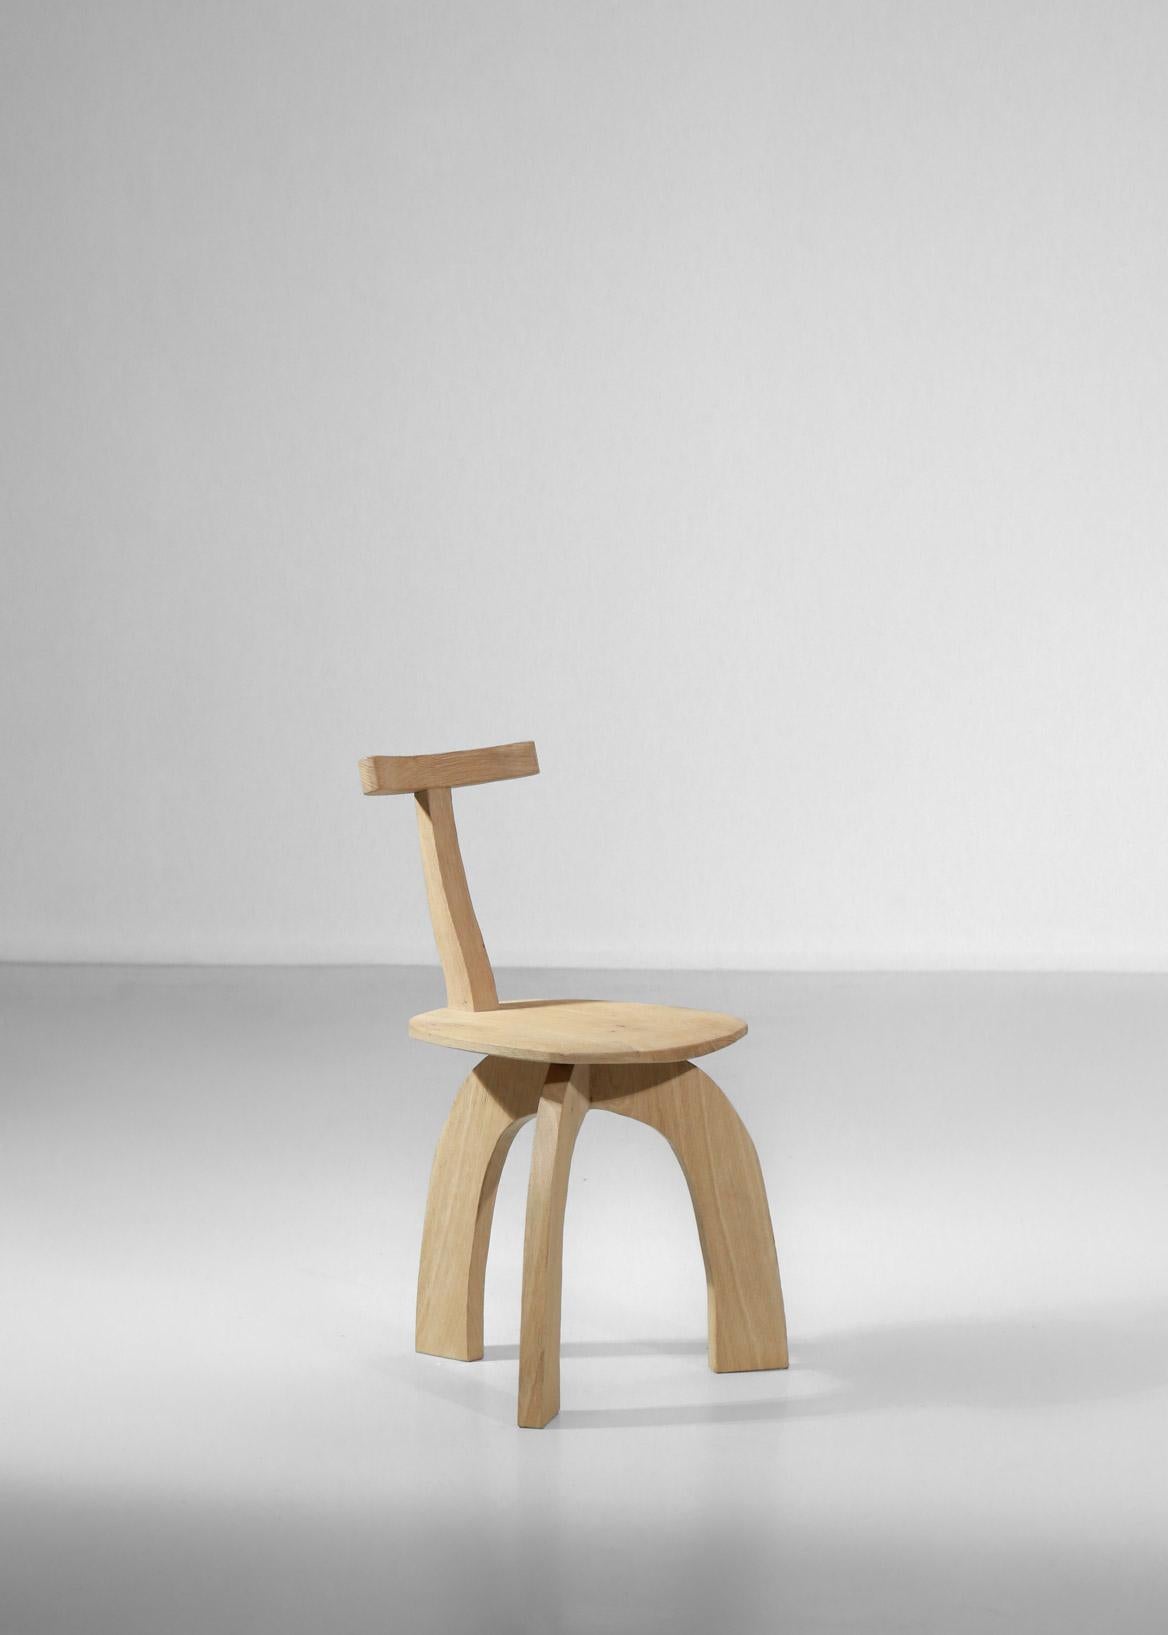 Artisanal Modern 80/20 Oak or Sycamore Chair Created by Vincent Vincent For Sale 7